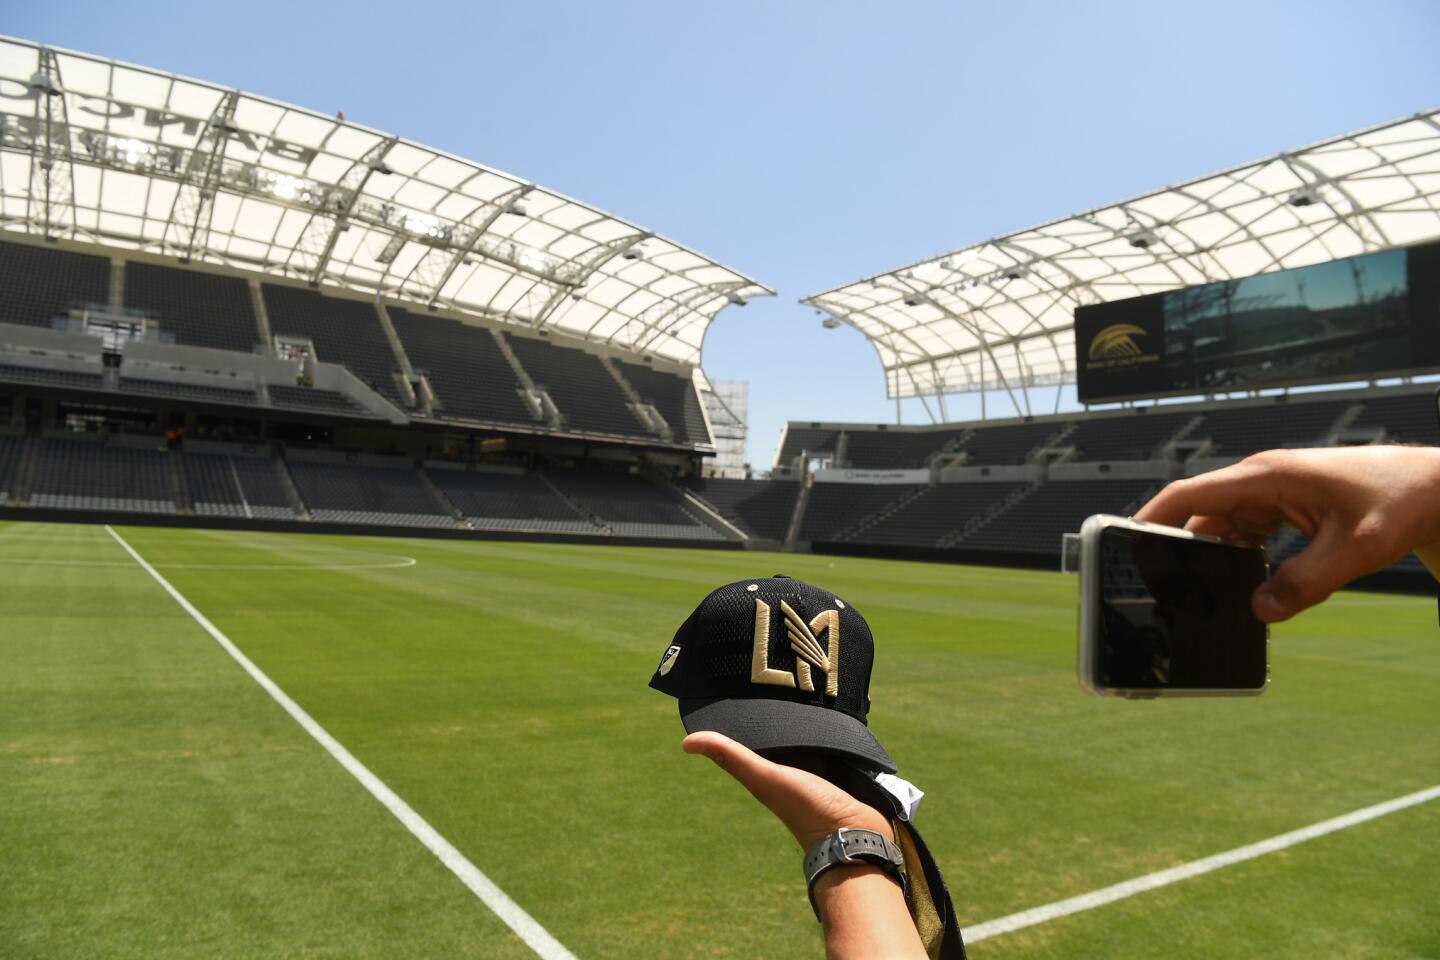 An LAFC fan takes a photo inside the LAFC's new stadium after ribbon cutting ceremonies on April 18.